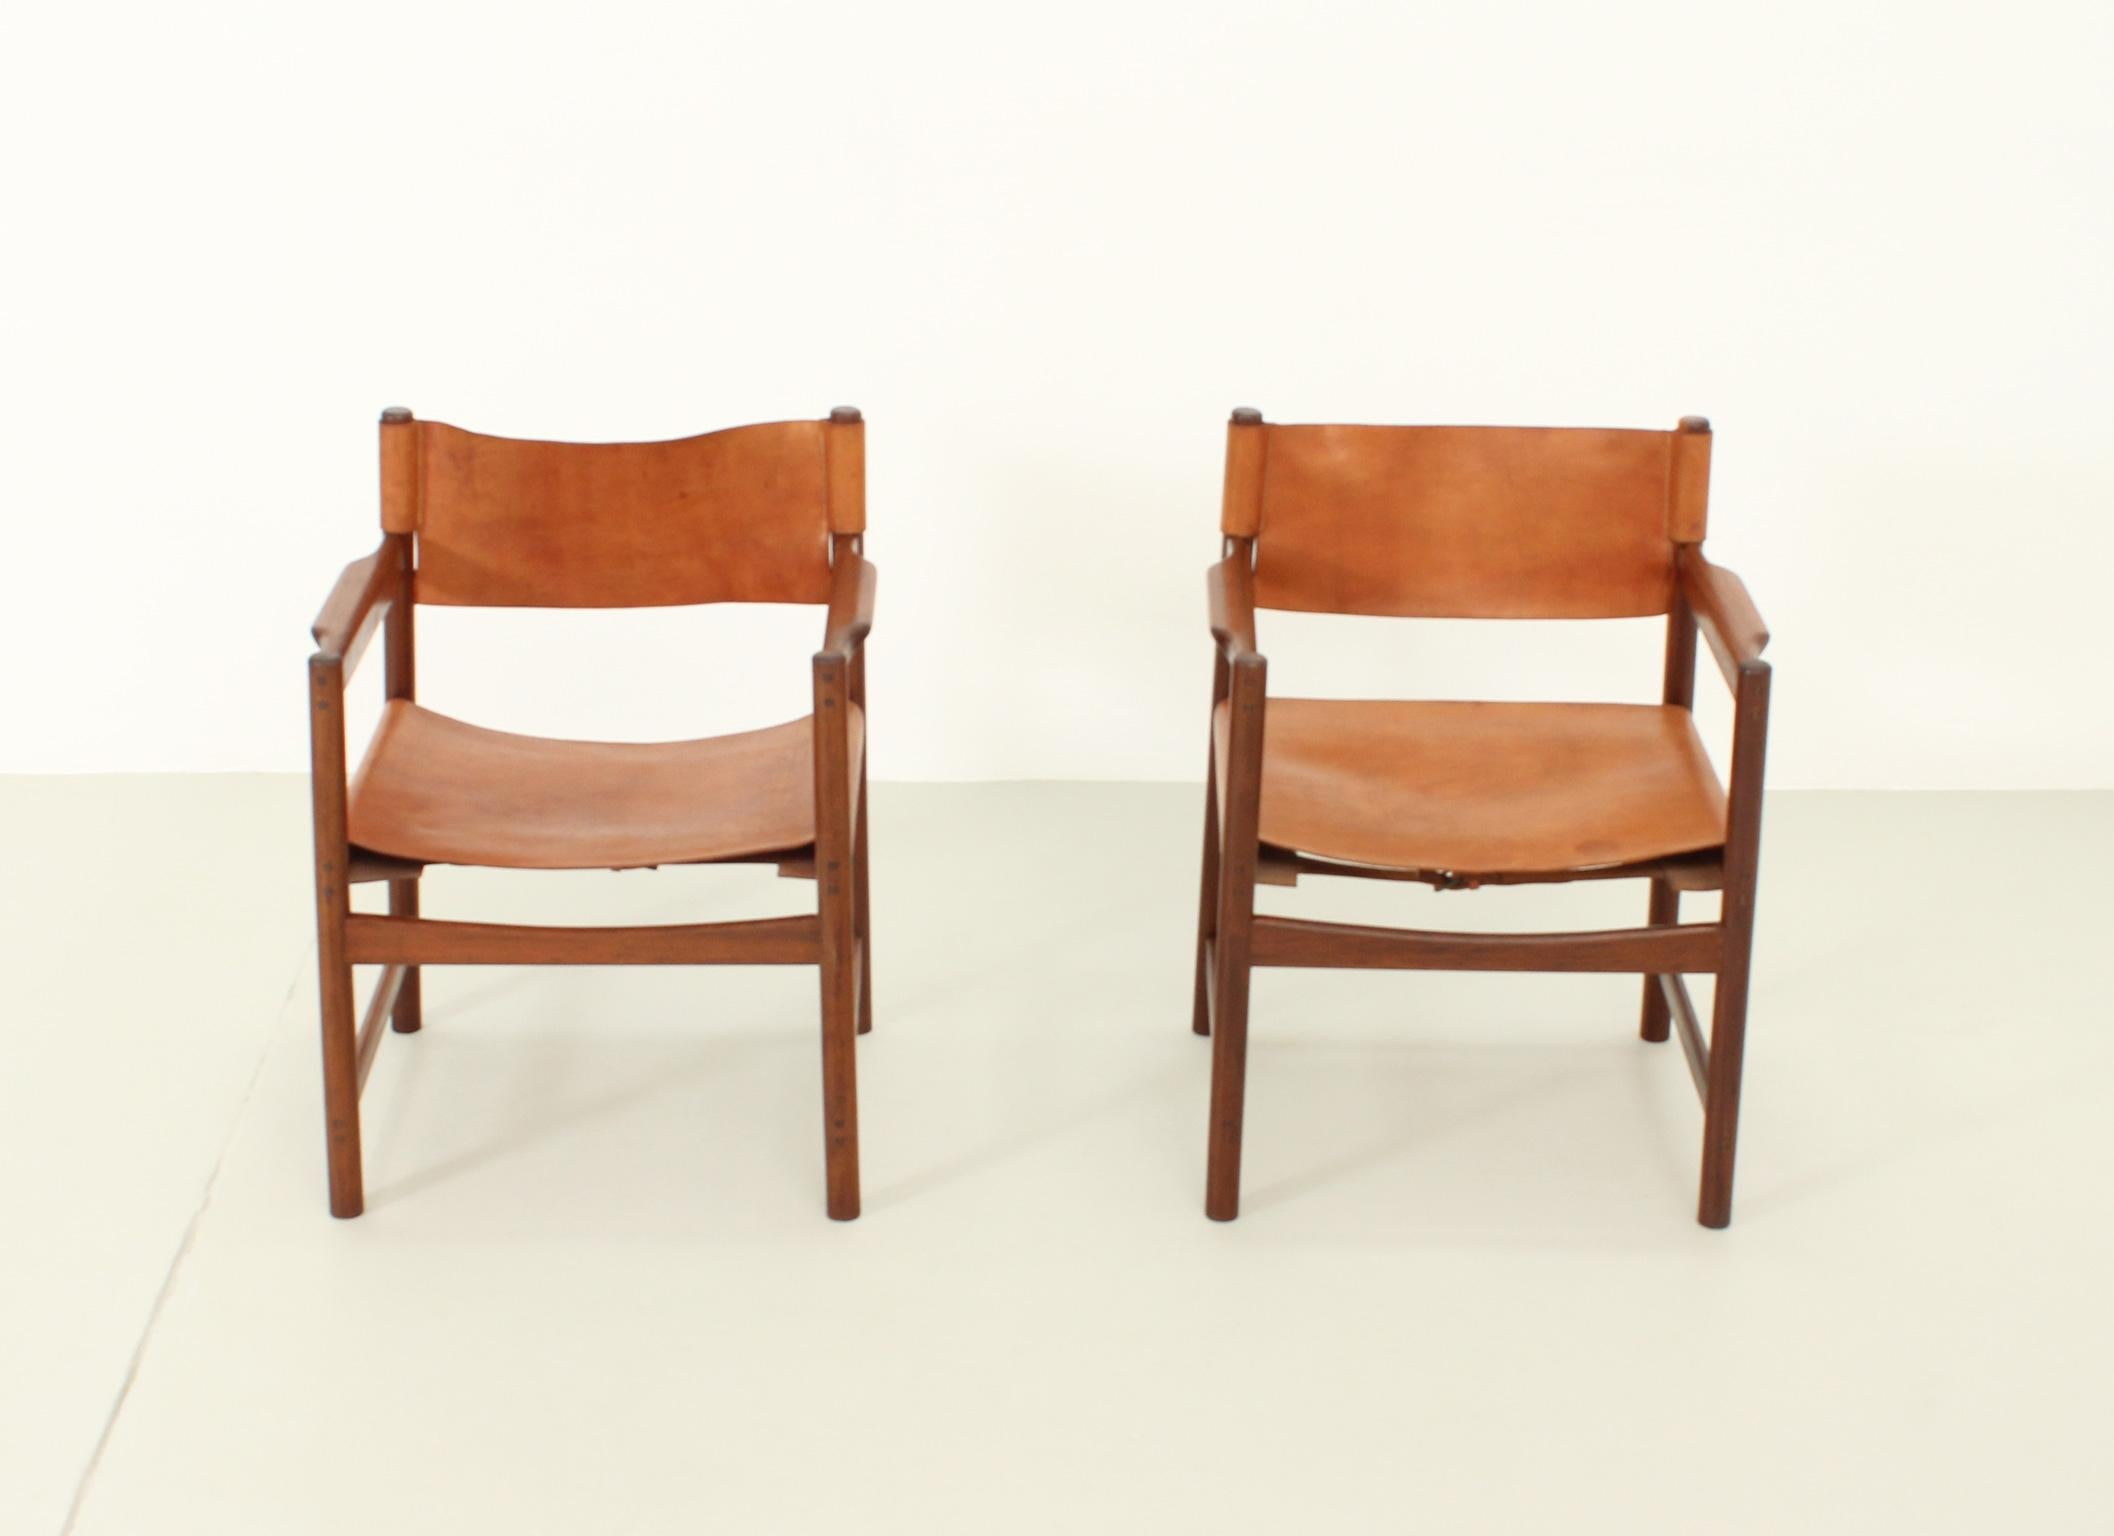 Mid-Century Modern Pair of Spanish Chairs in Cognac Leather, Spain, 1960's